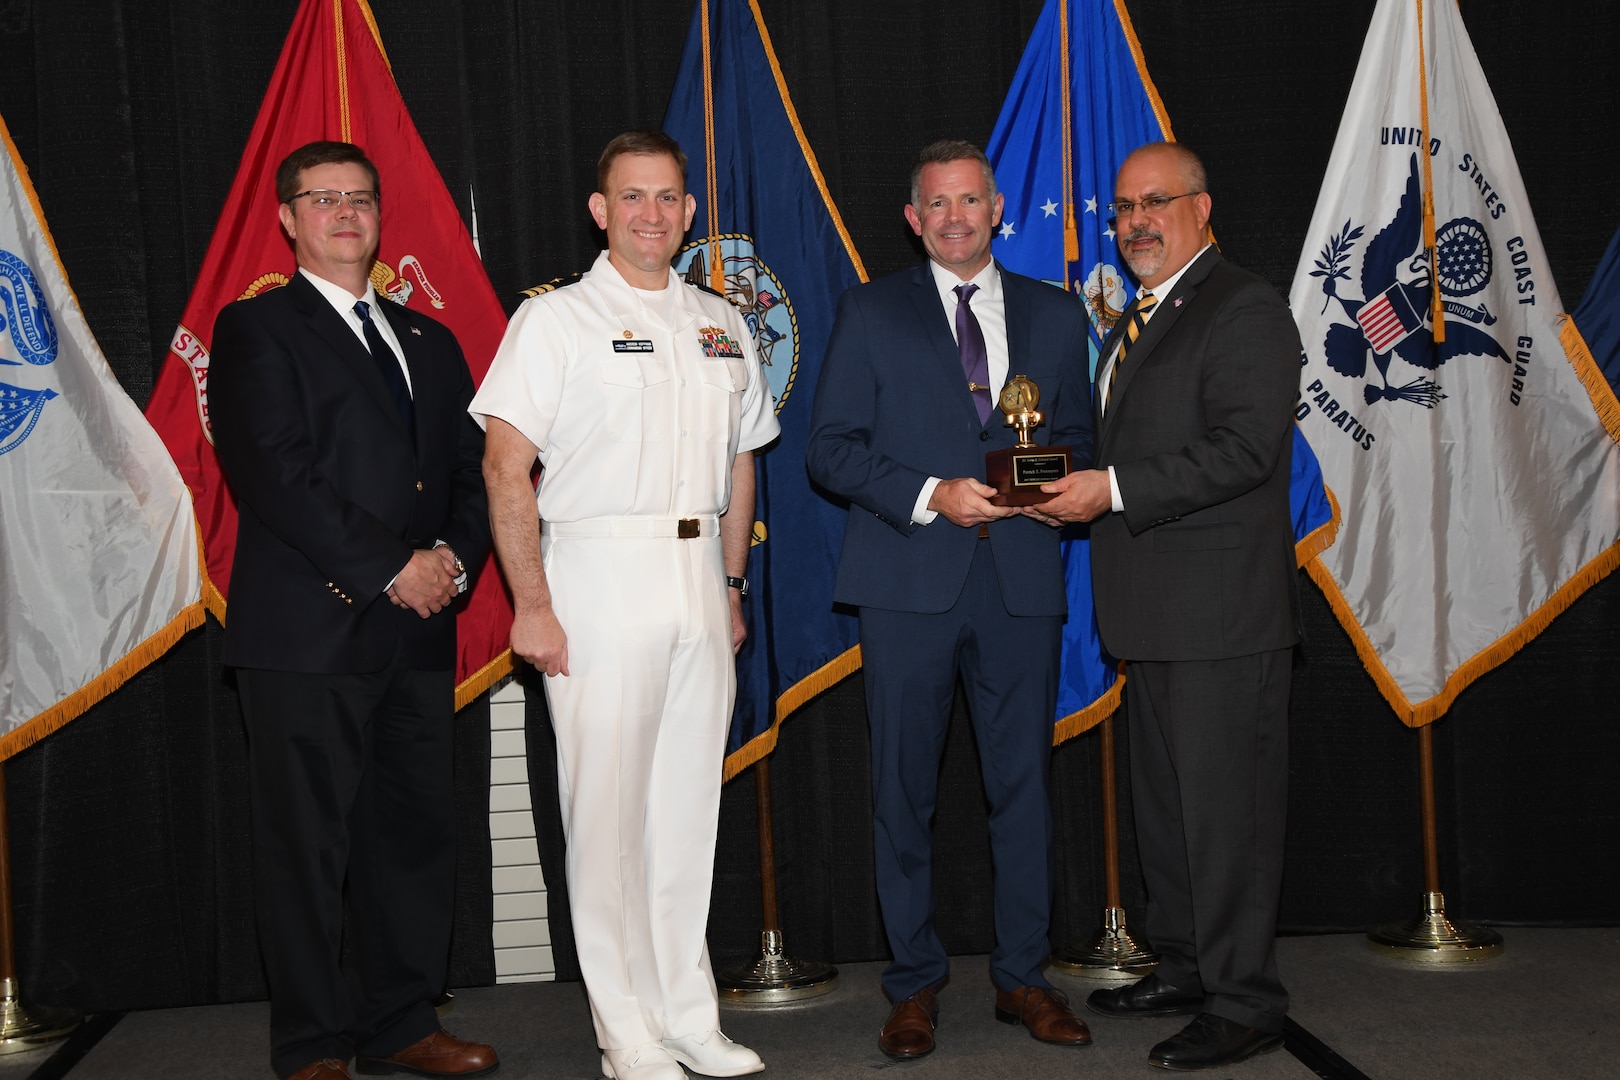 IMAGE: Patrick Freemyers is presented the Dr. James Colvard Award at Naval Surface Warfare Center Dahlgren Division's annual awards ceremony, Apr. 26 at the Fredericksburg Expo and Conference Center.